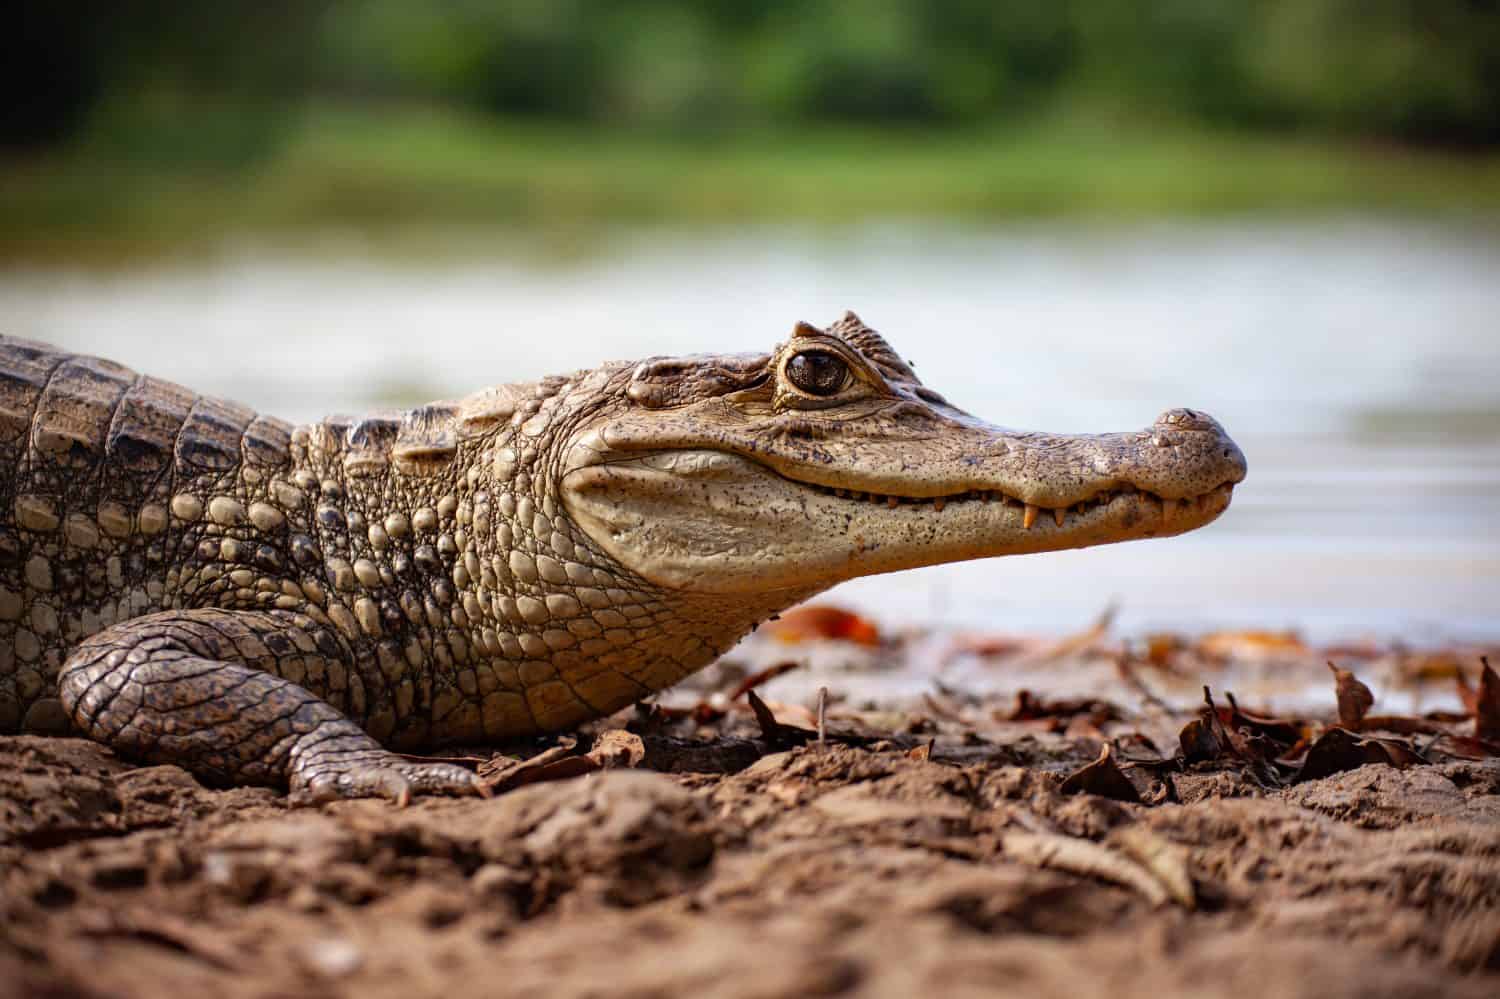 A Spectacled Caiman Crocodile rests on the bank of a lagoon on the Colombian Island of San Andres